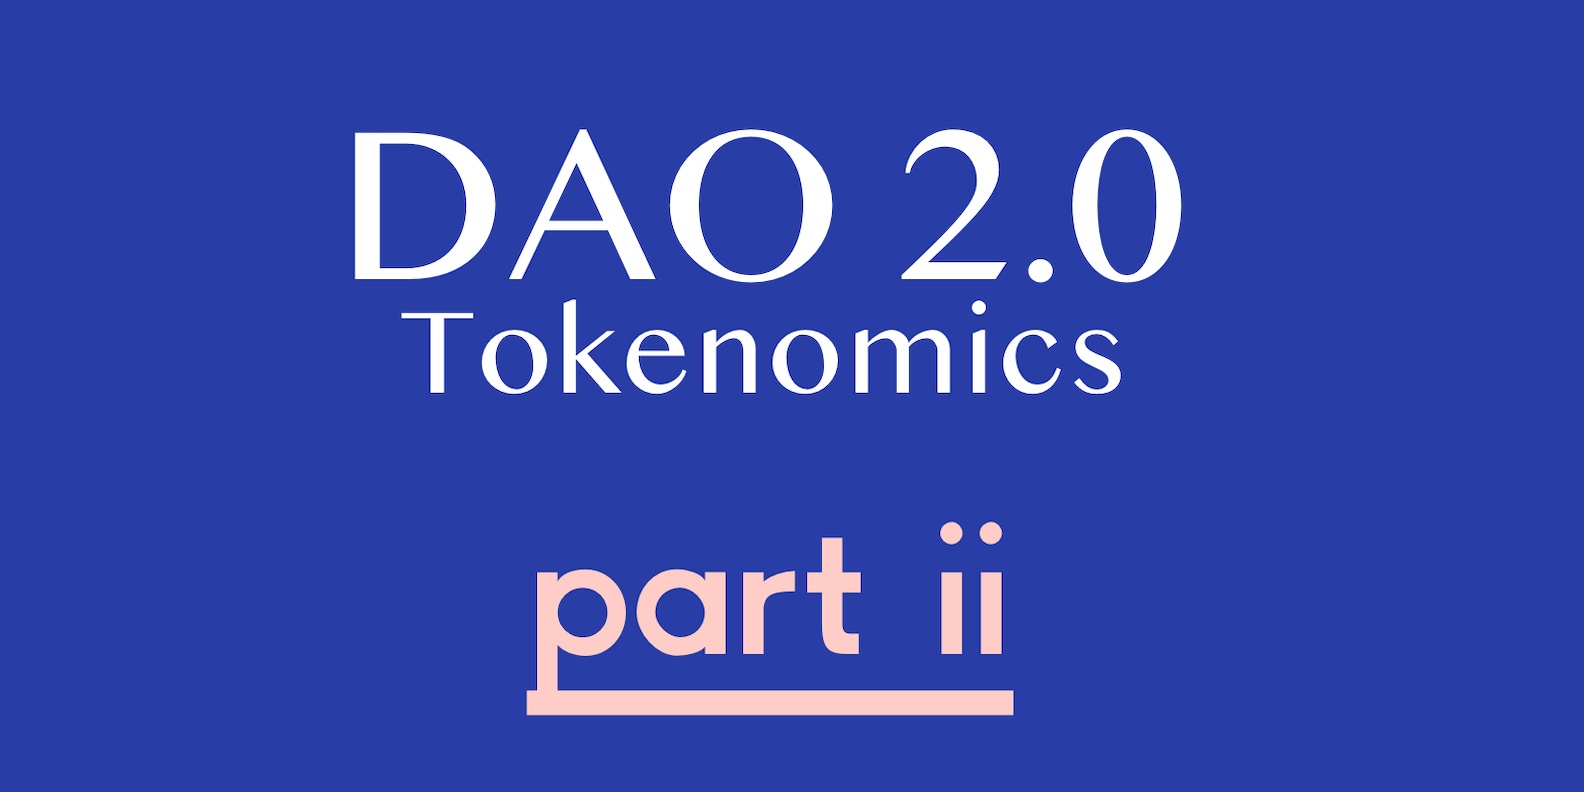 What Does DAO 2.0 Tokenomics Look Like? (Part 2) – Introducing BUFF